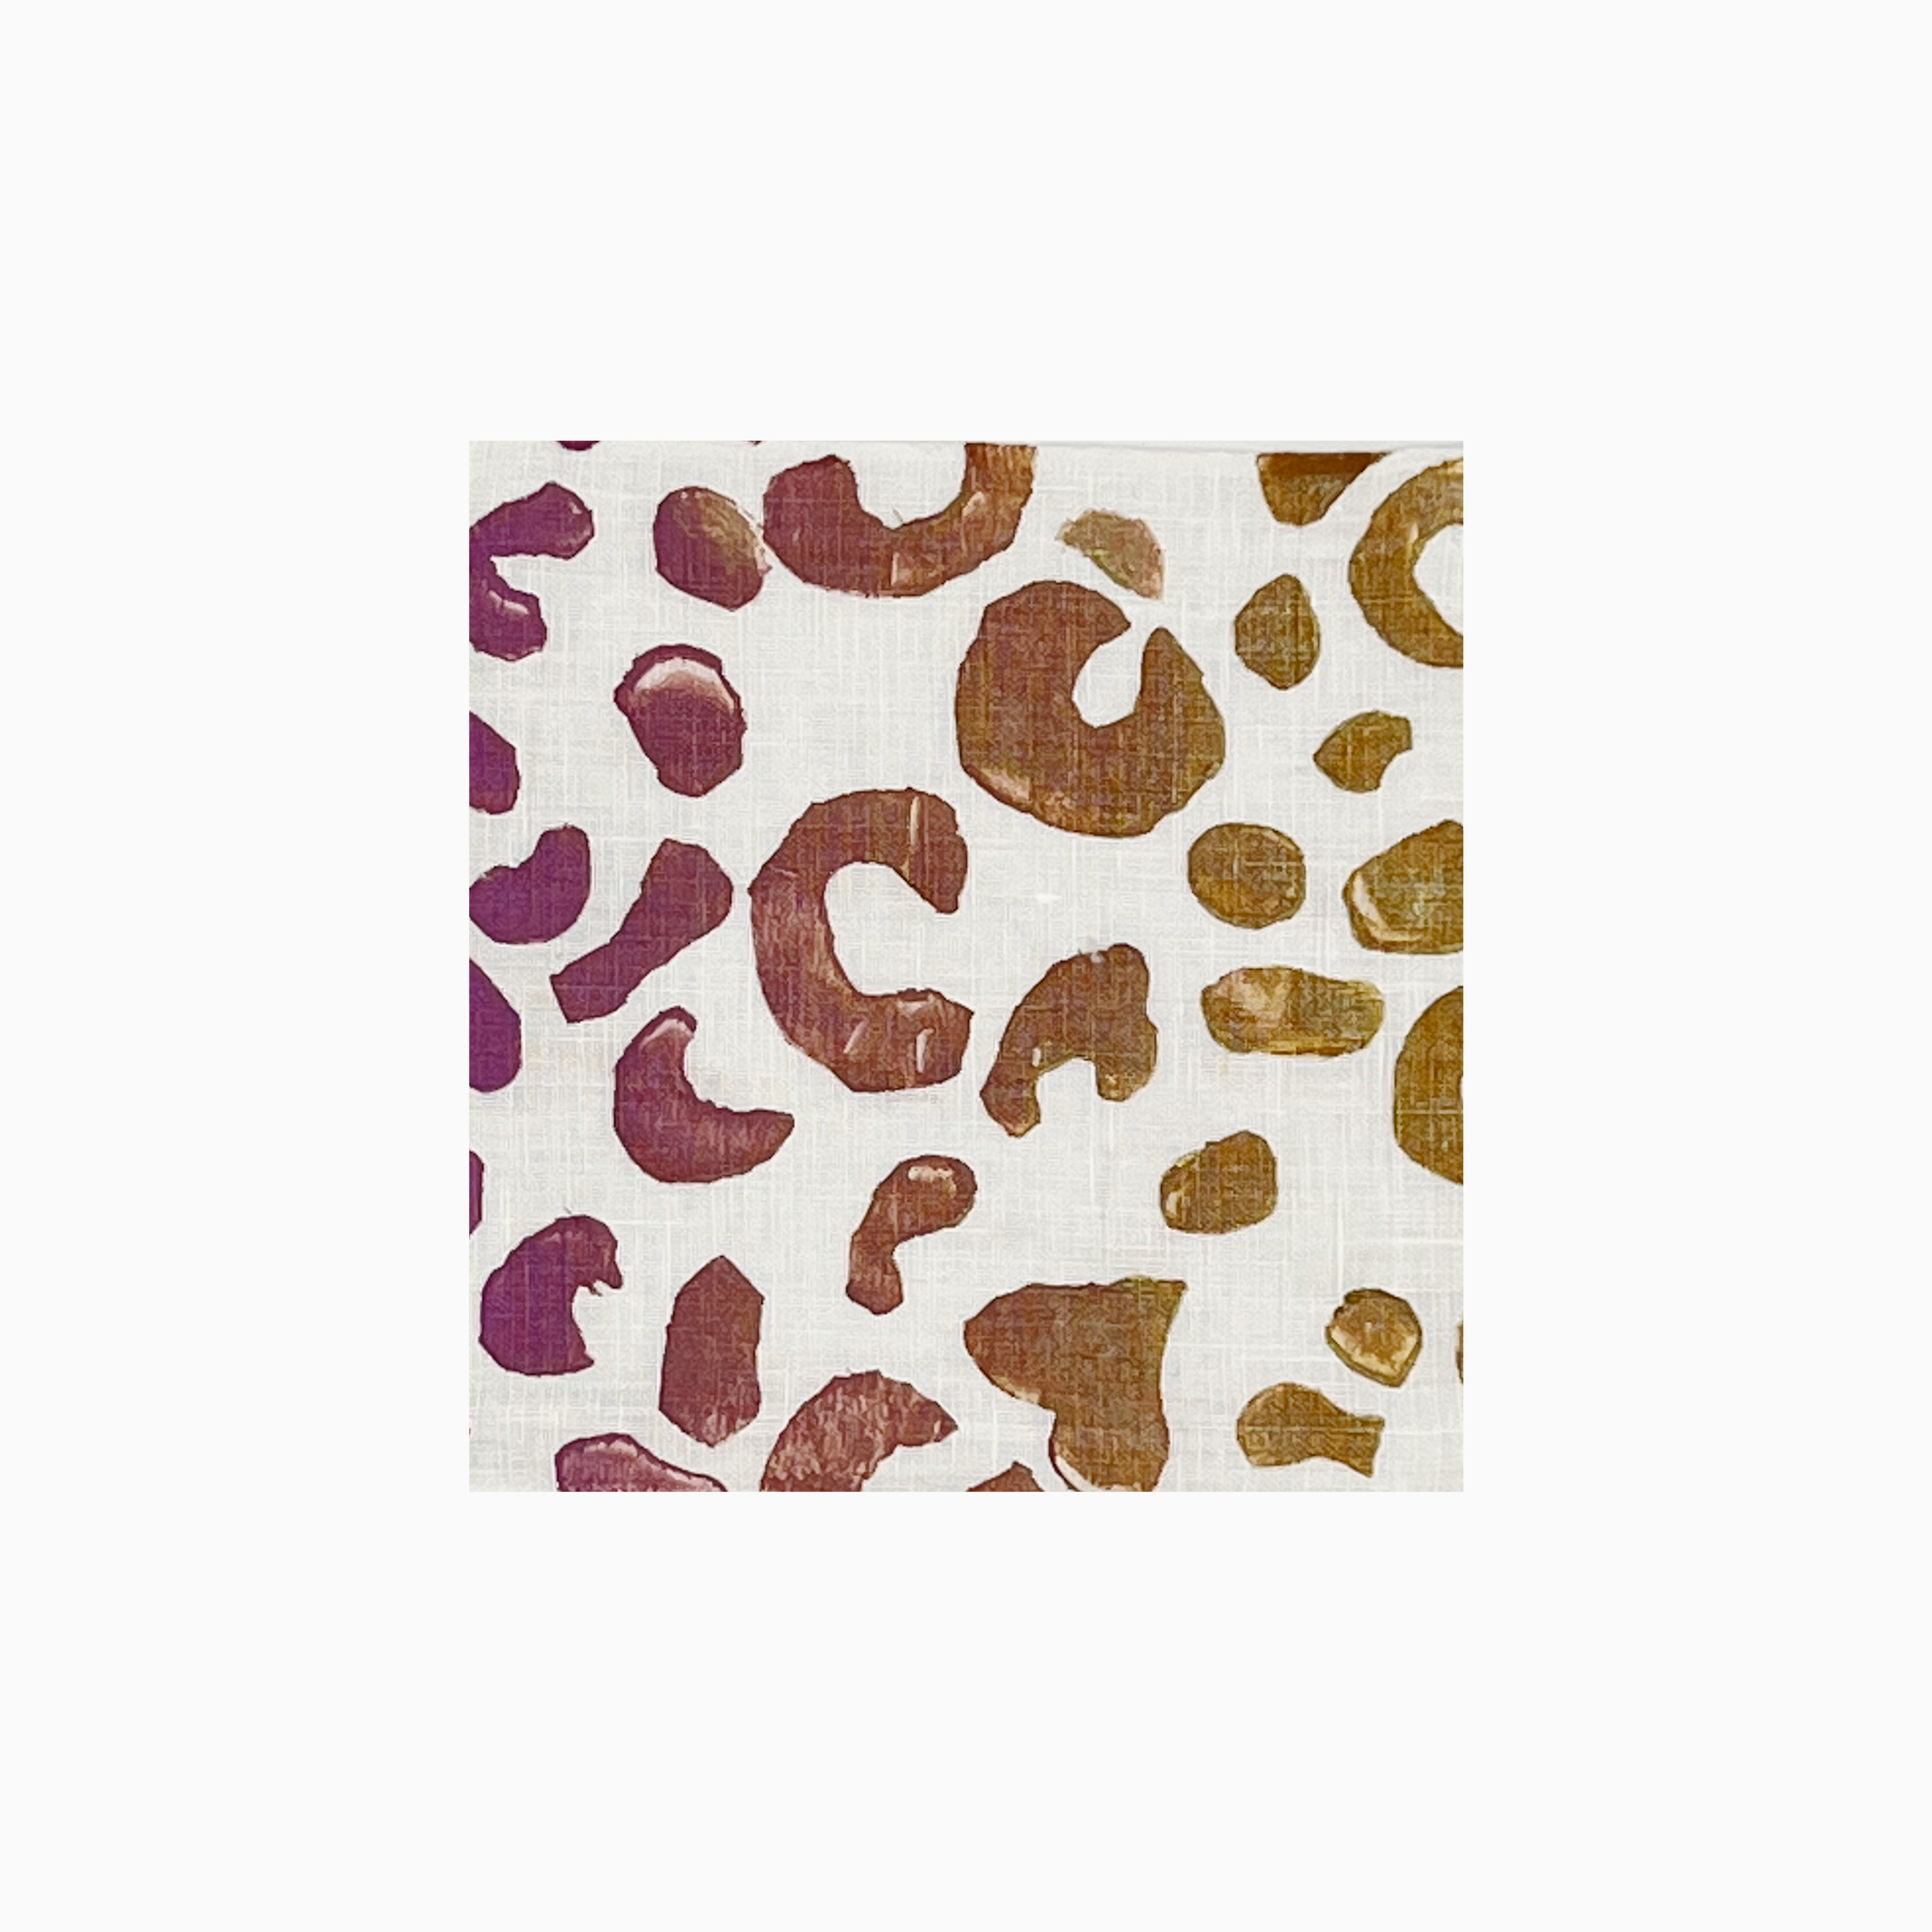 On the Prowl -  Cheetah Print Cocktail Napkins in 6 Color-Ways